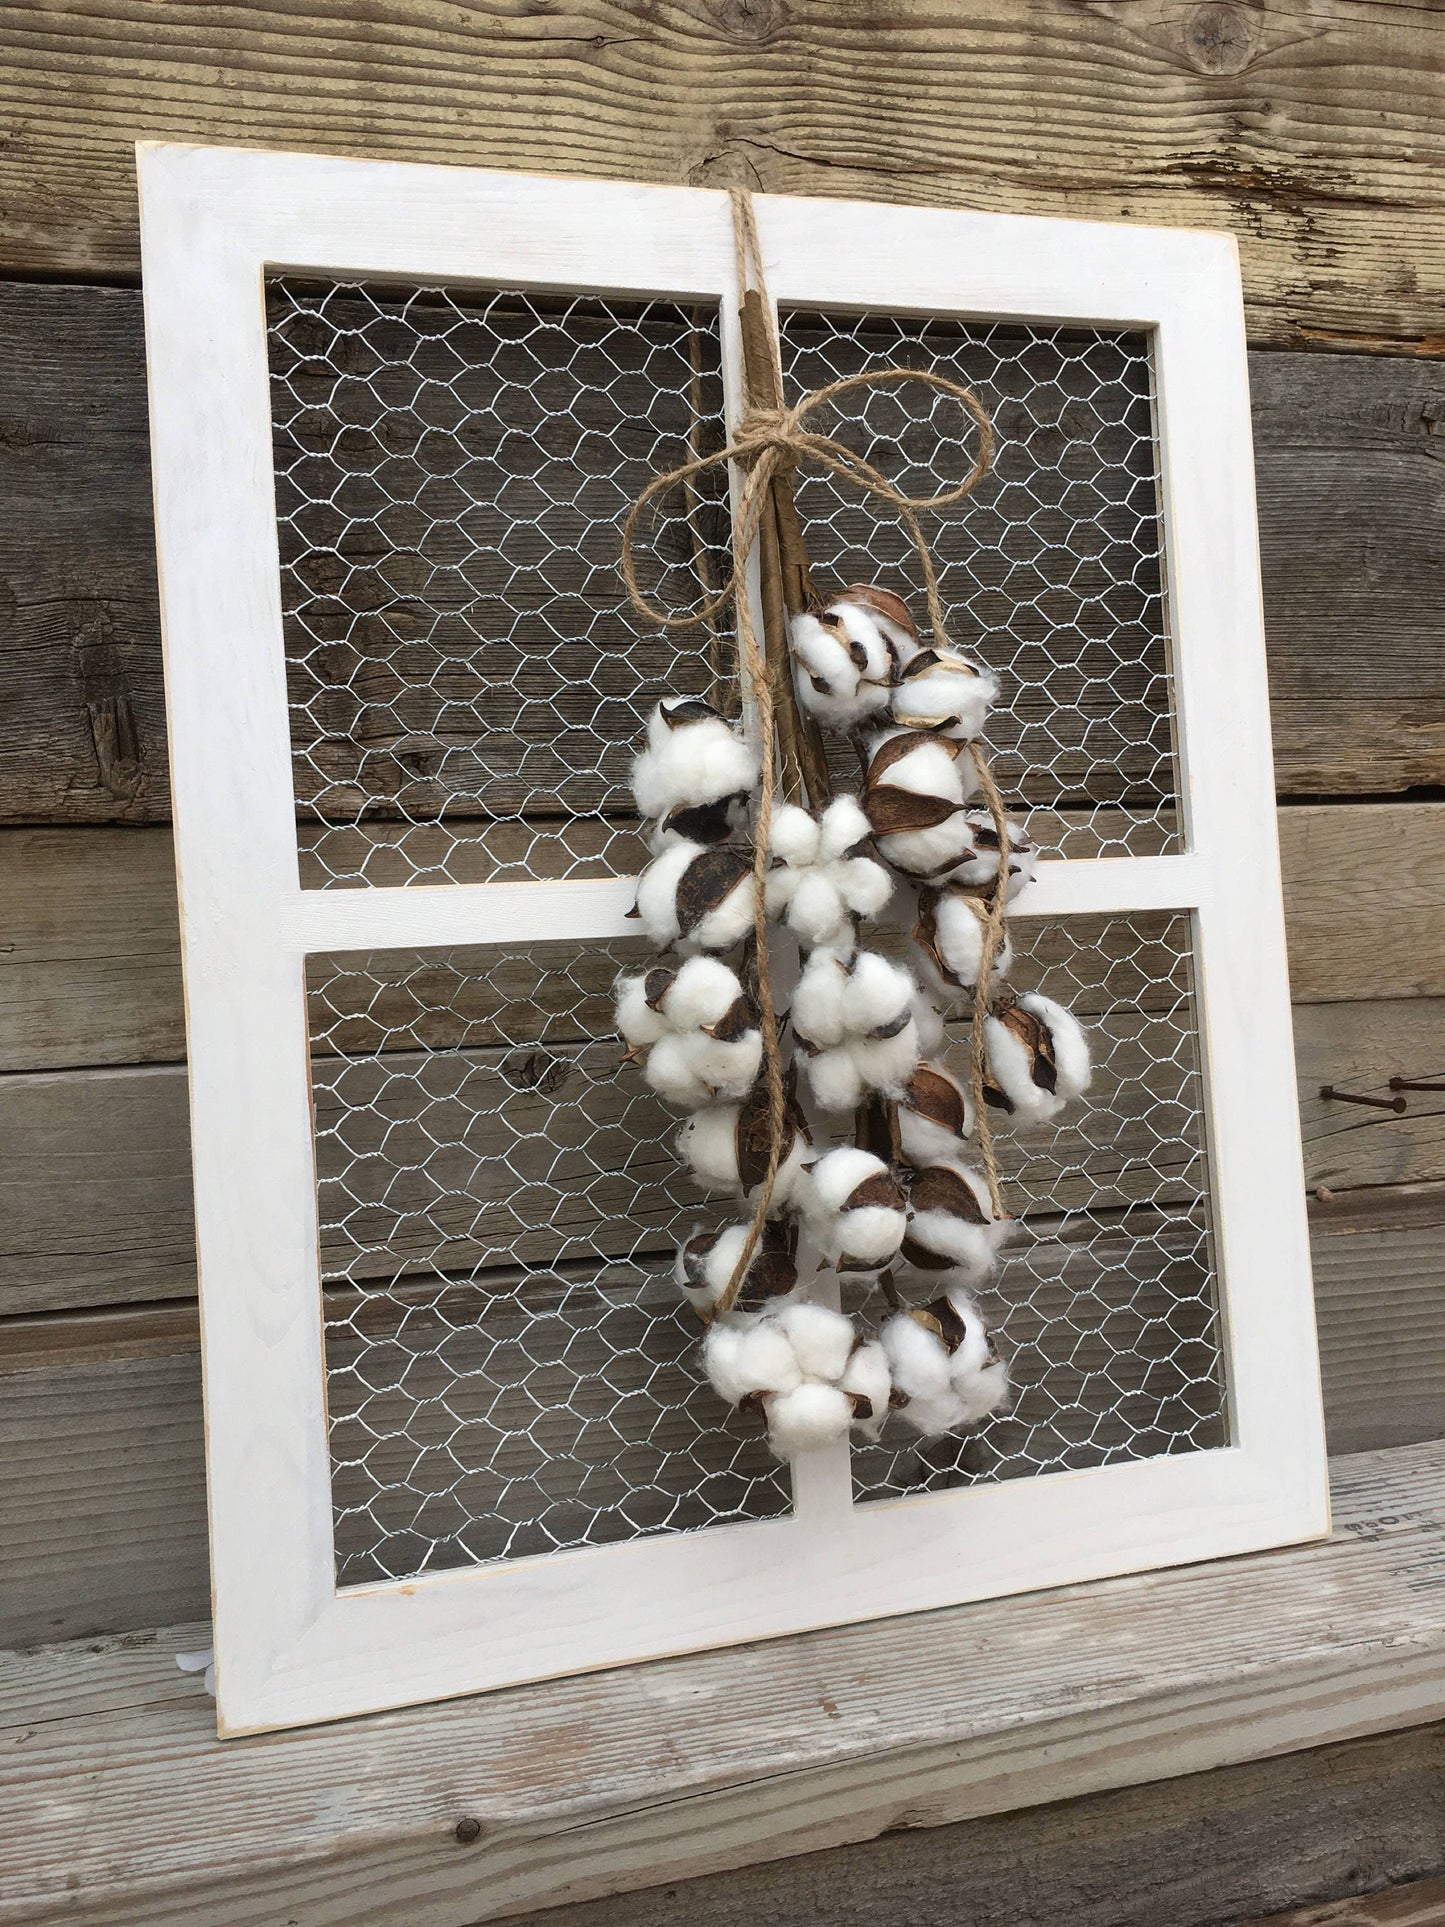 Rustic Wood Wall Hanging Window Fram with Chicken Wire and Wreath or Cotton Swag